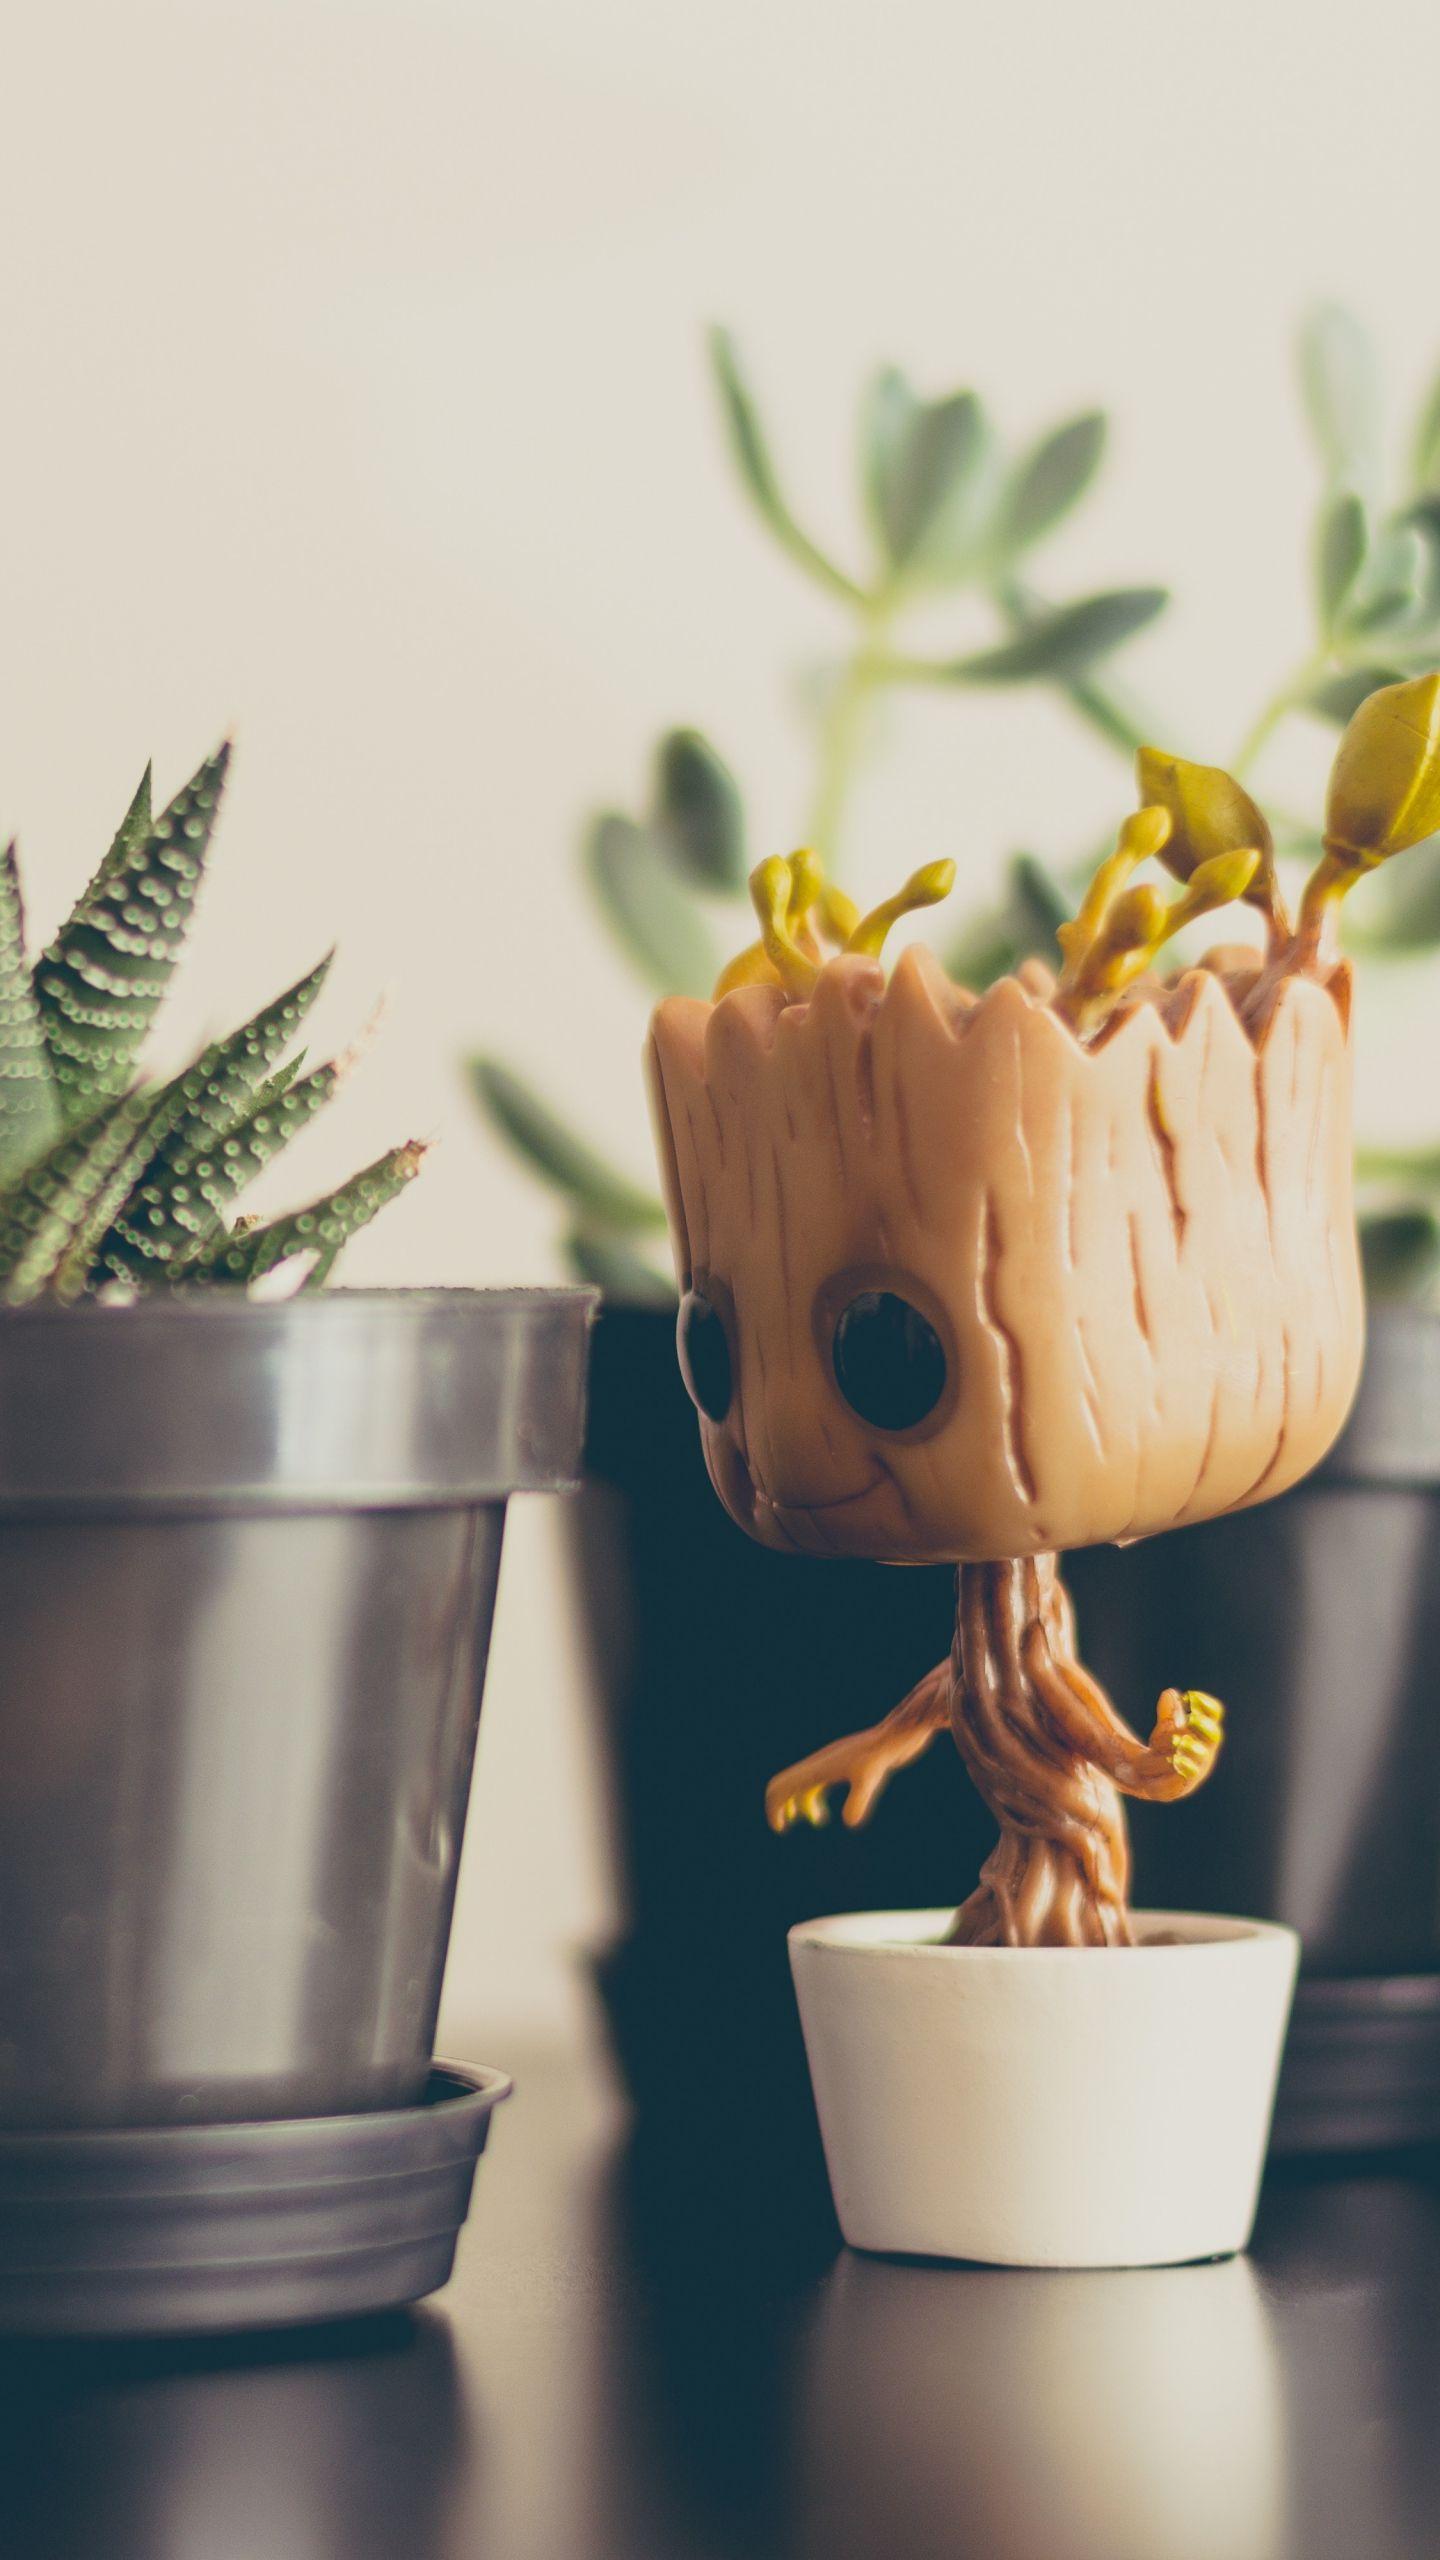 Download Wallpaper 1440x2560 Groot, Baby, House plants QHD Samsung